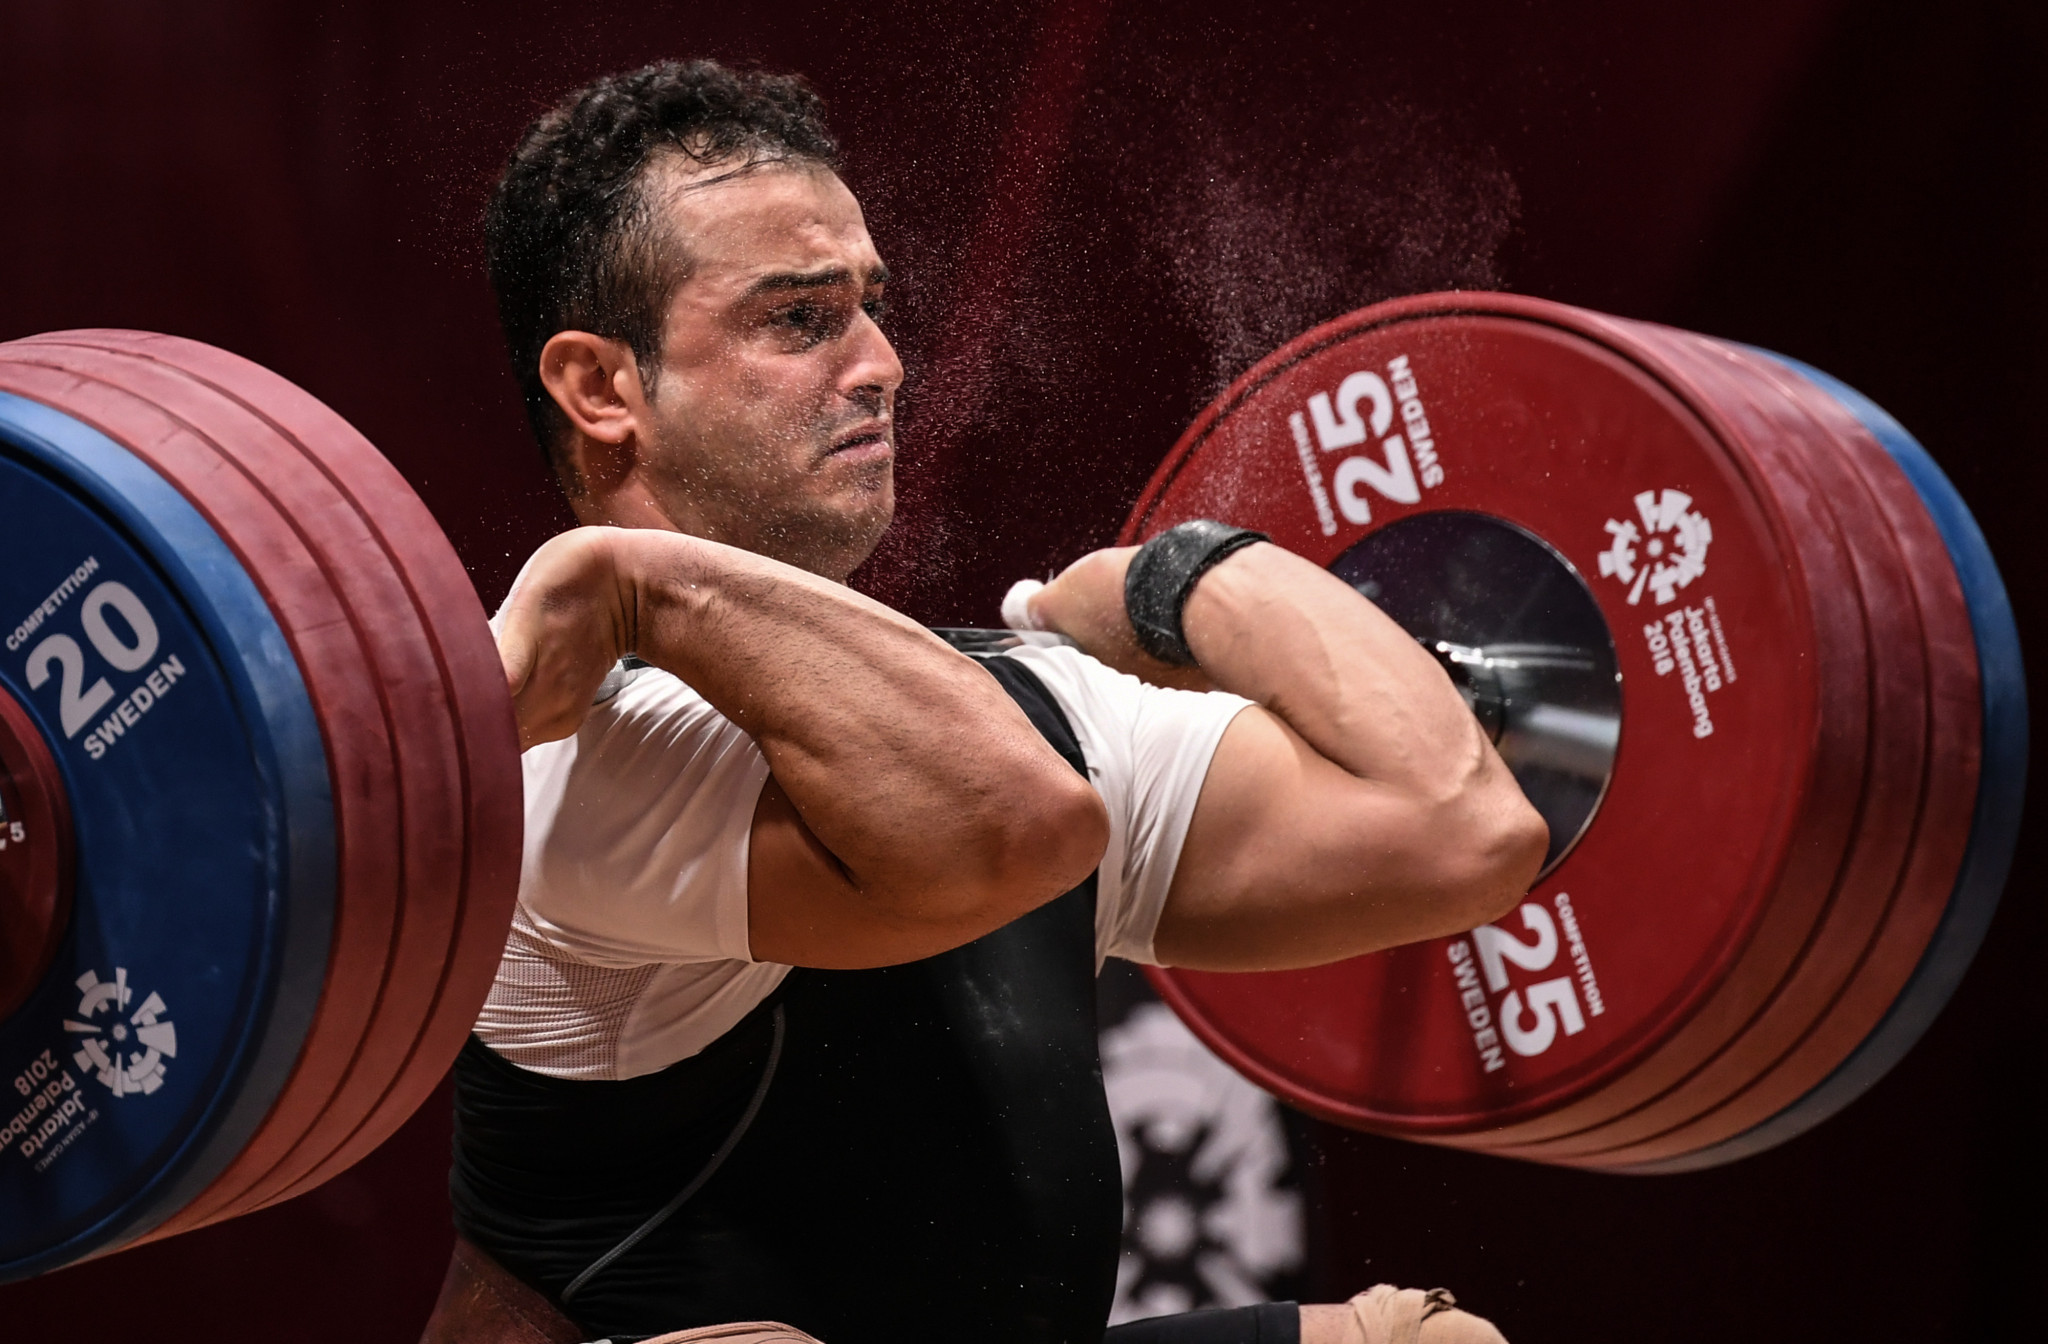 Iran's top weightlifter Sohrab Moradi likely to miss Tokyo 2020 after spinal surgery   